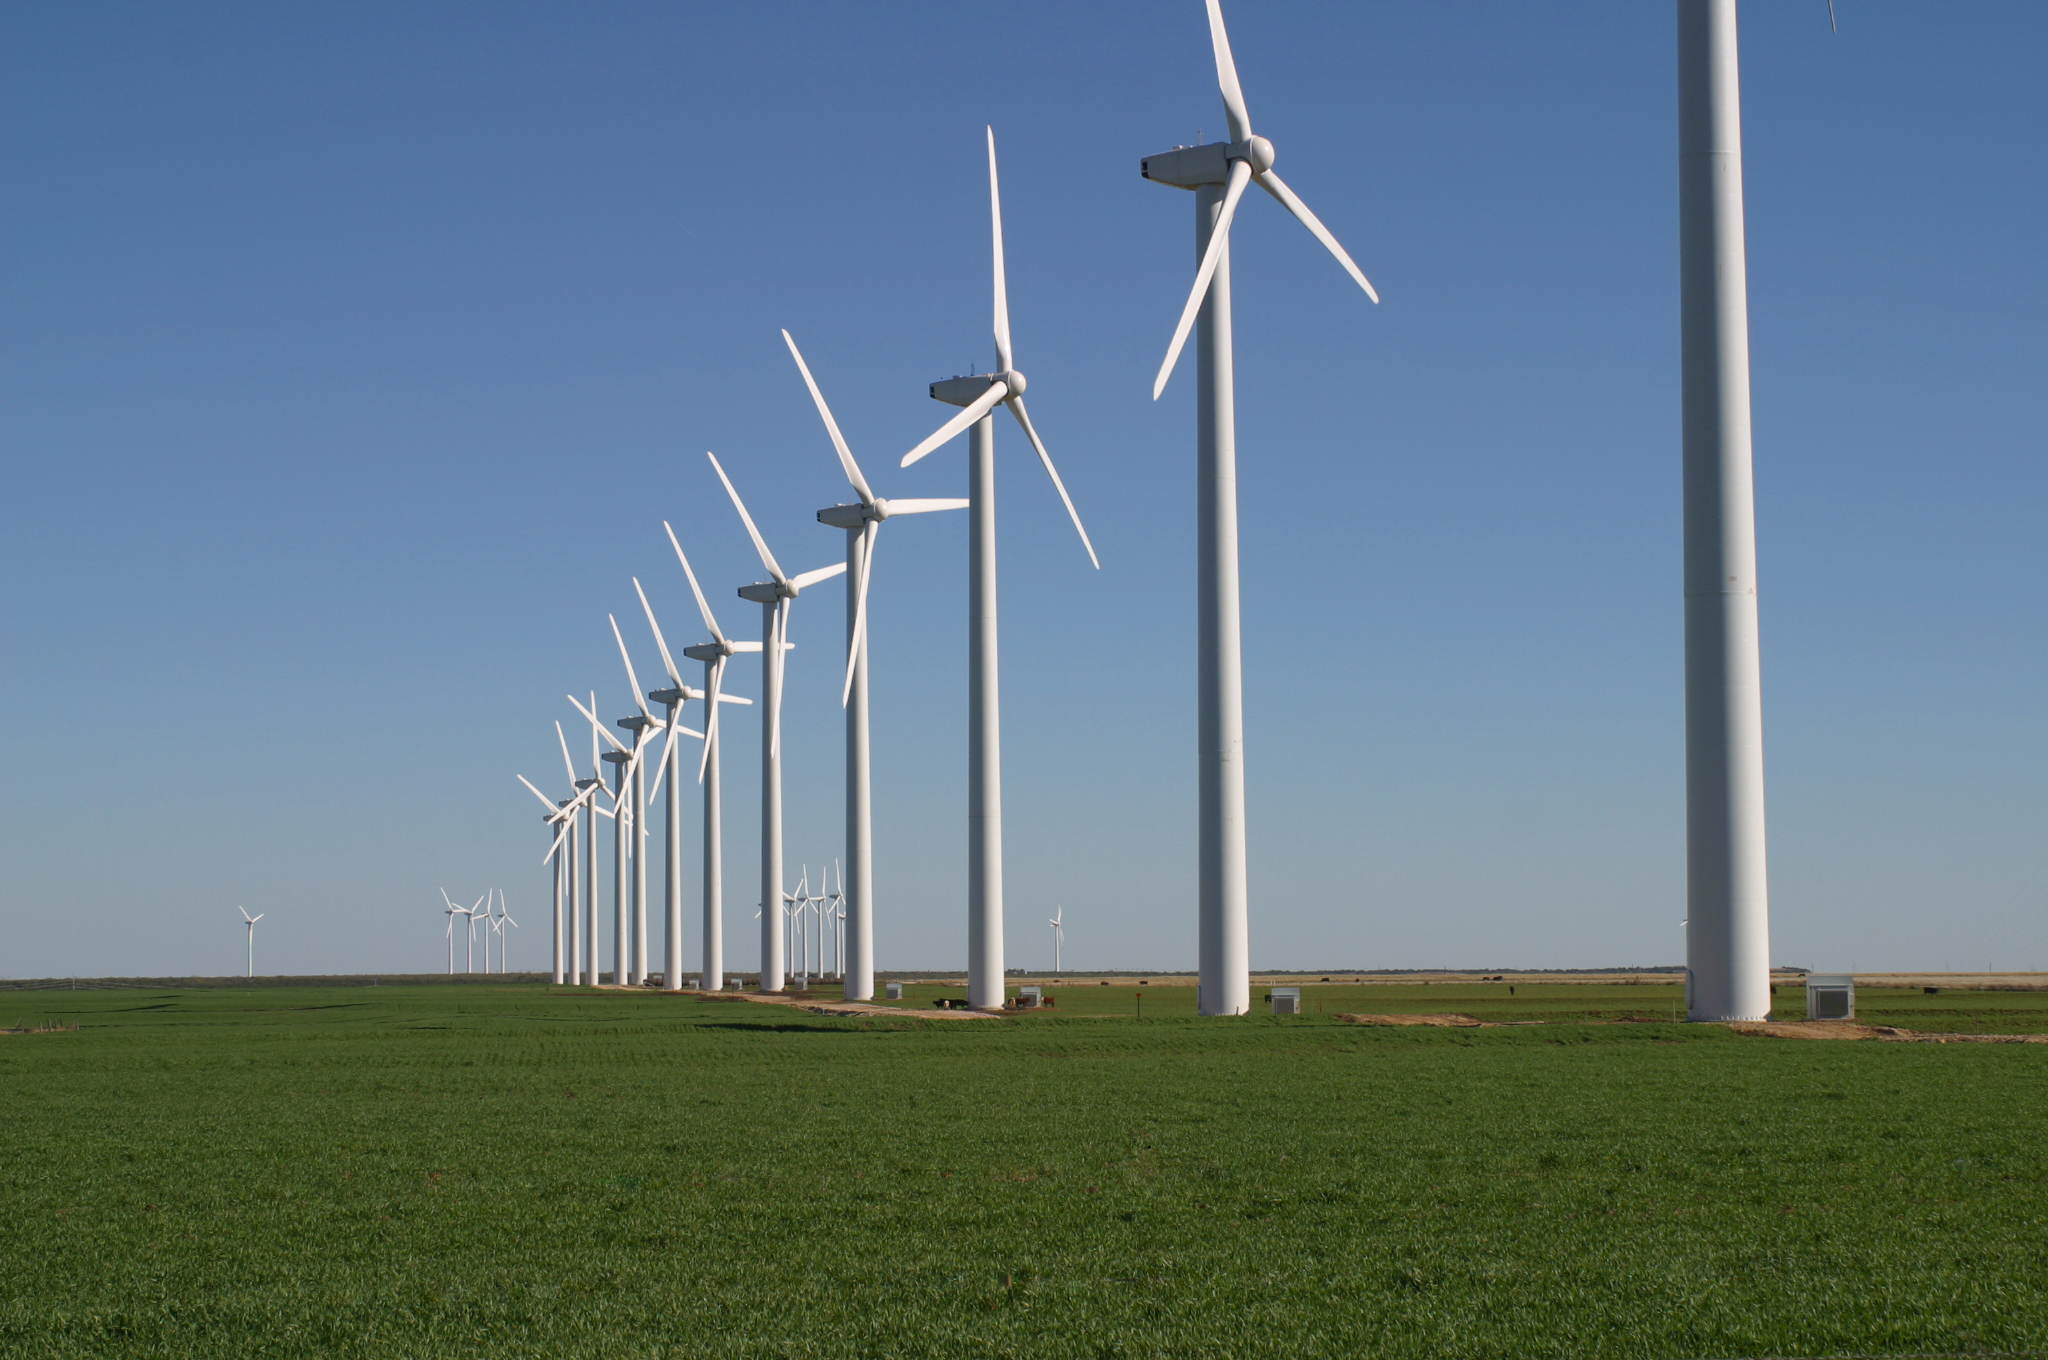 Tamaulipas wind industry invests US$465 million to combat COVID-19